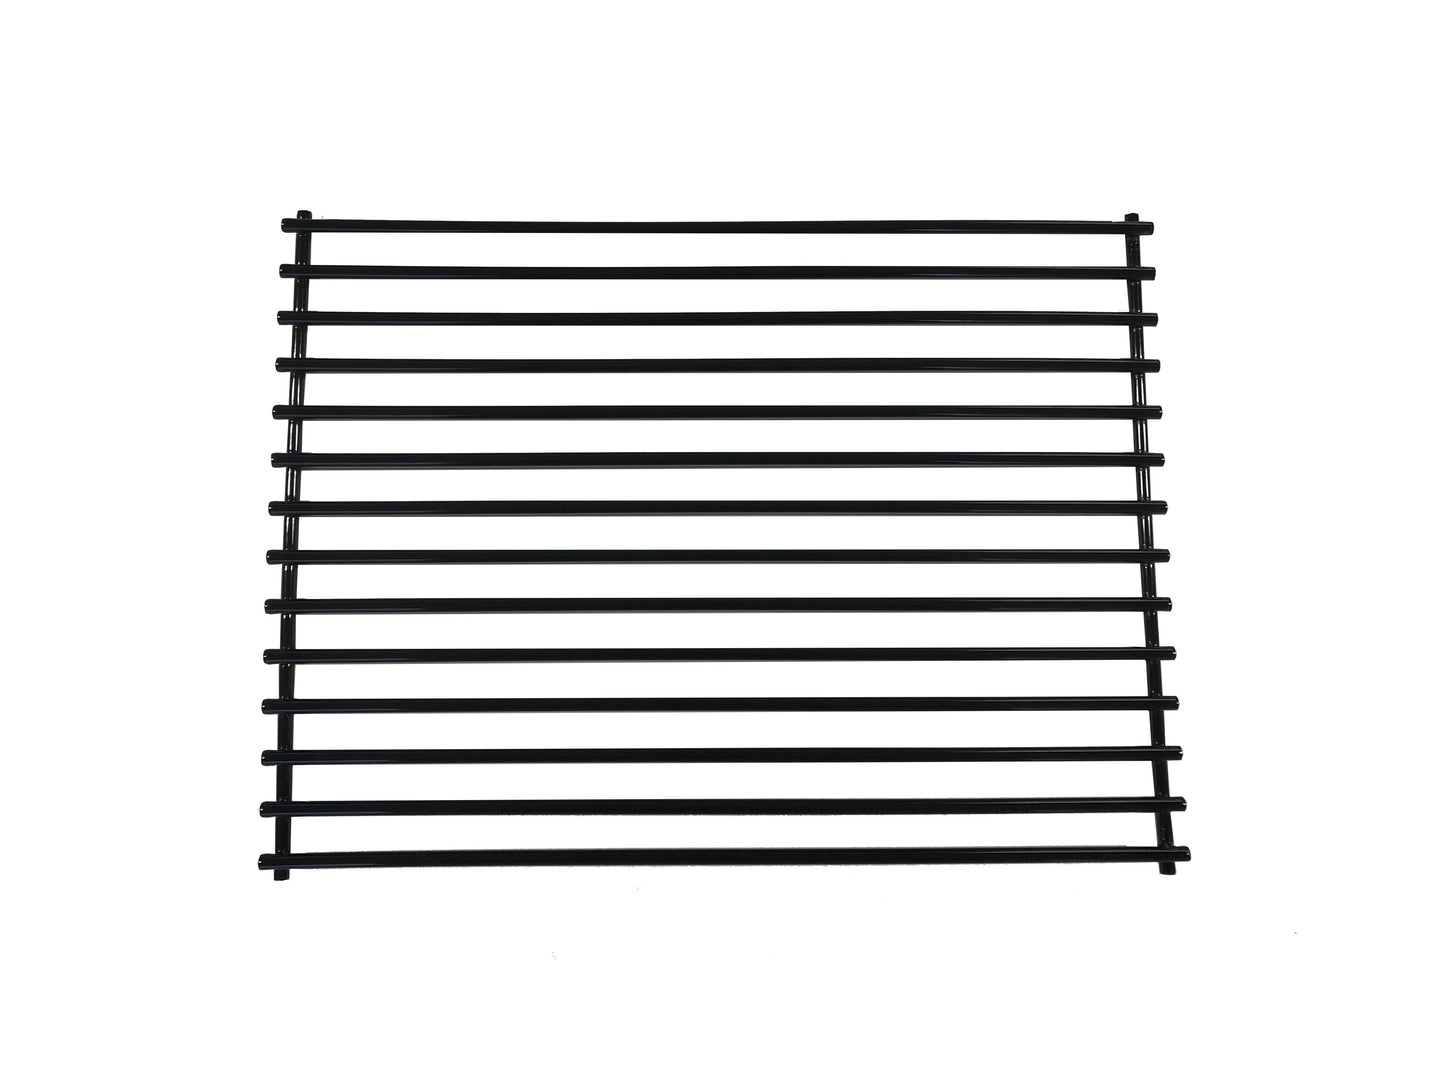 Broil King 10225T341 14 7/8” x 11” porcelain coated cooking grid.  Available at Barbecues Galore: Burlington, Oakville, Etobicoke & Calgary.